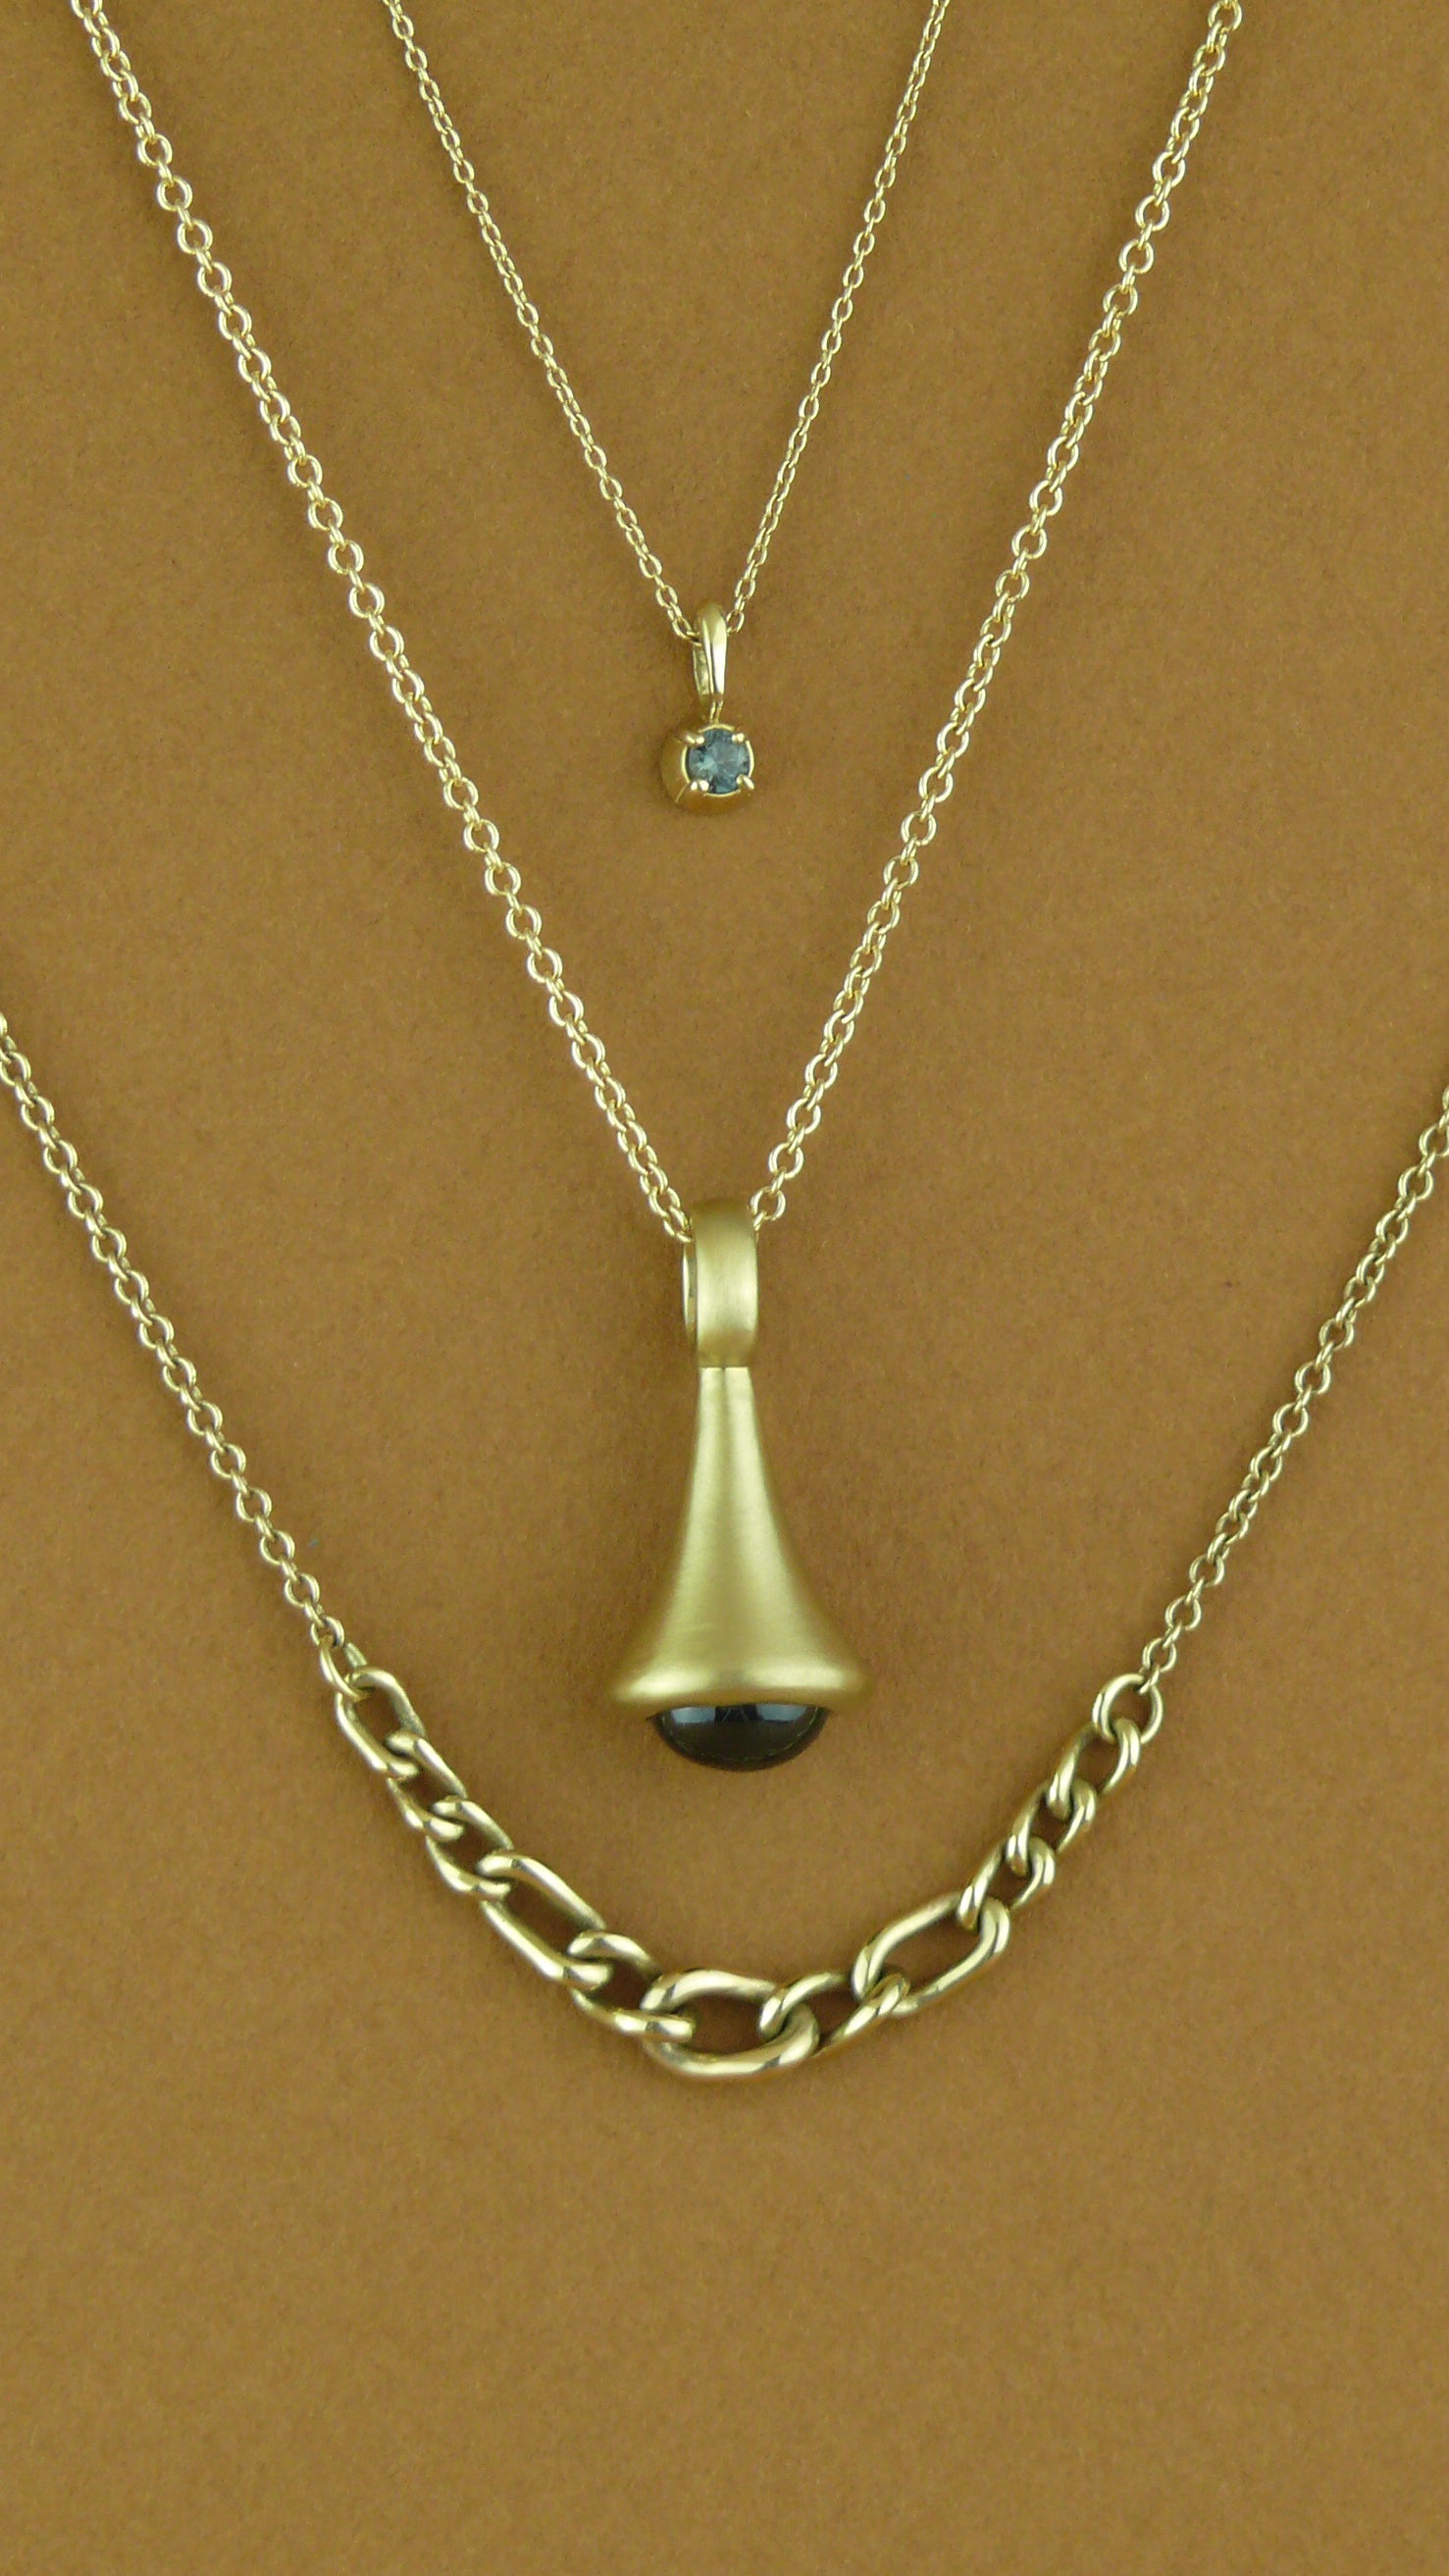 One-of-a-Kind Gold Blue Sapphire Pendulum Charm No. 2, graduated curb chain necklace, and tourmaline blossom charm on brown paper